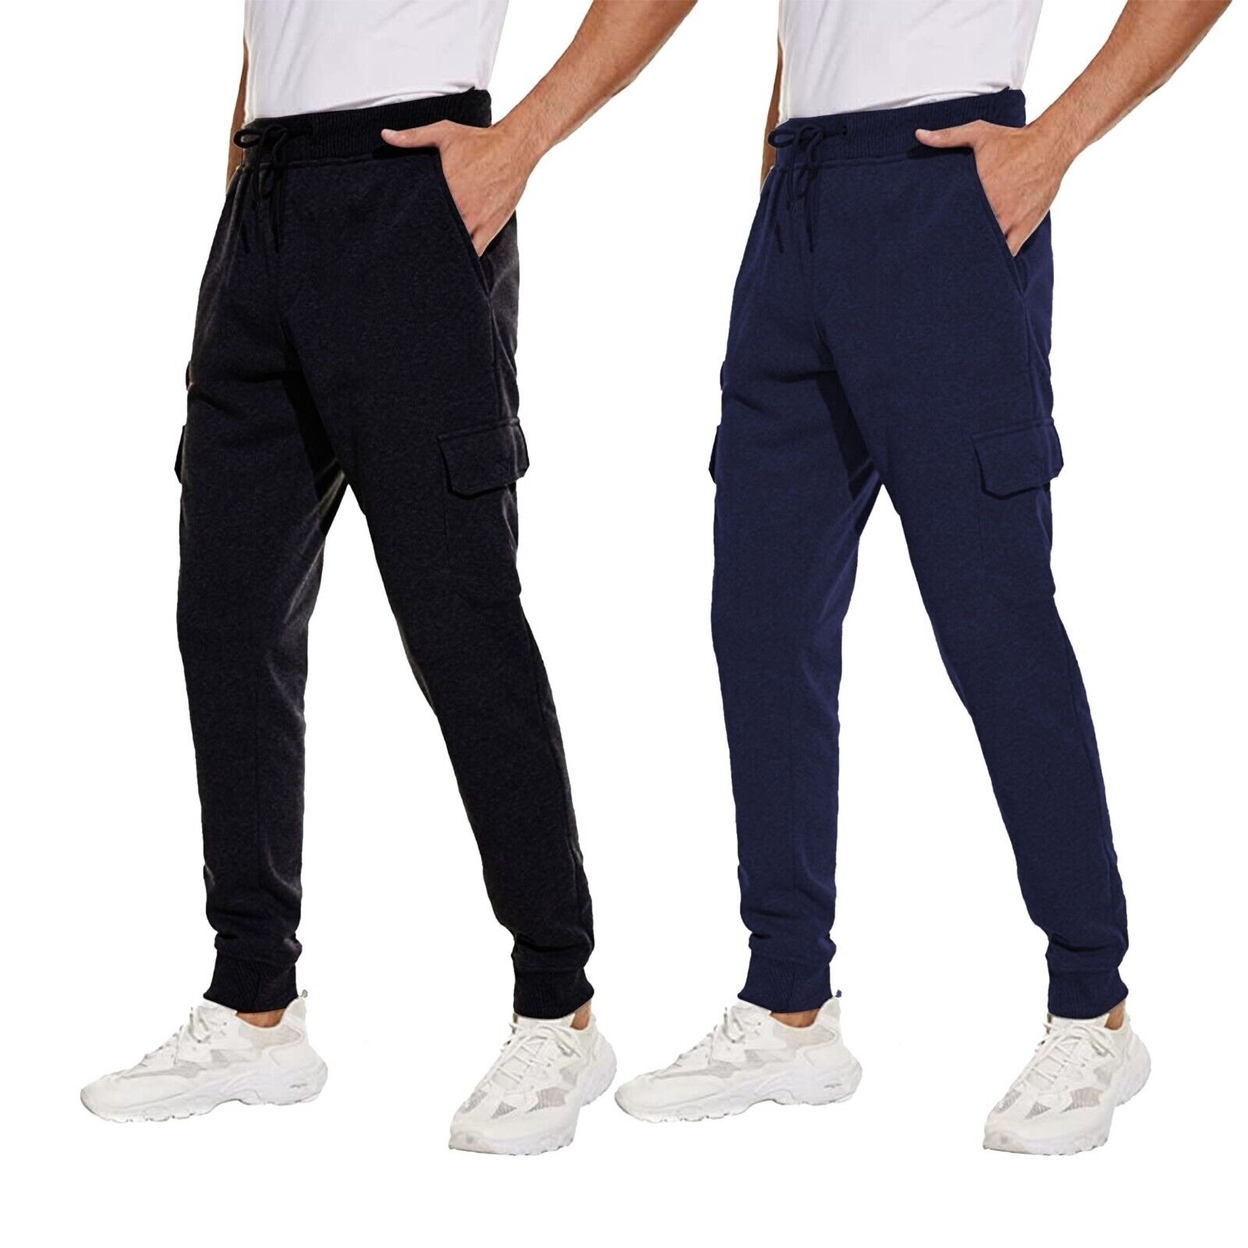 2-Pack Men's Ultra Soft Winter Warm Thick Athletic Sherpa Lined Jogger Pants - Black&navy, Medium